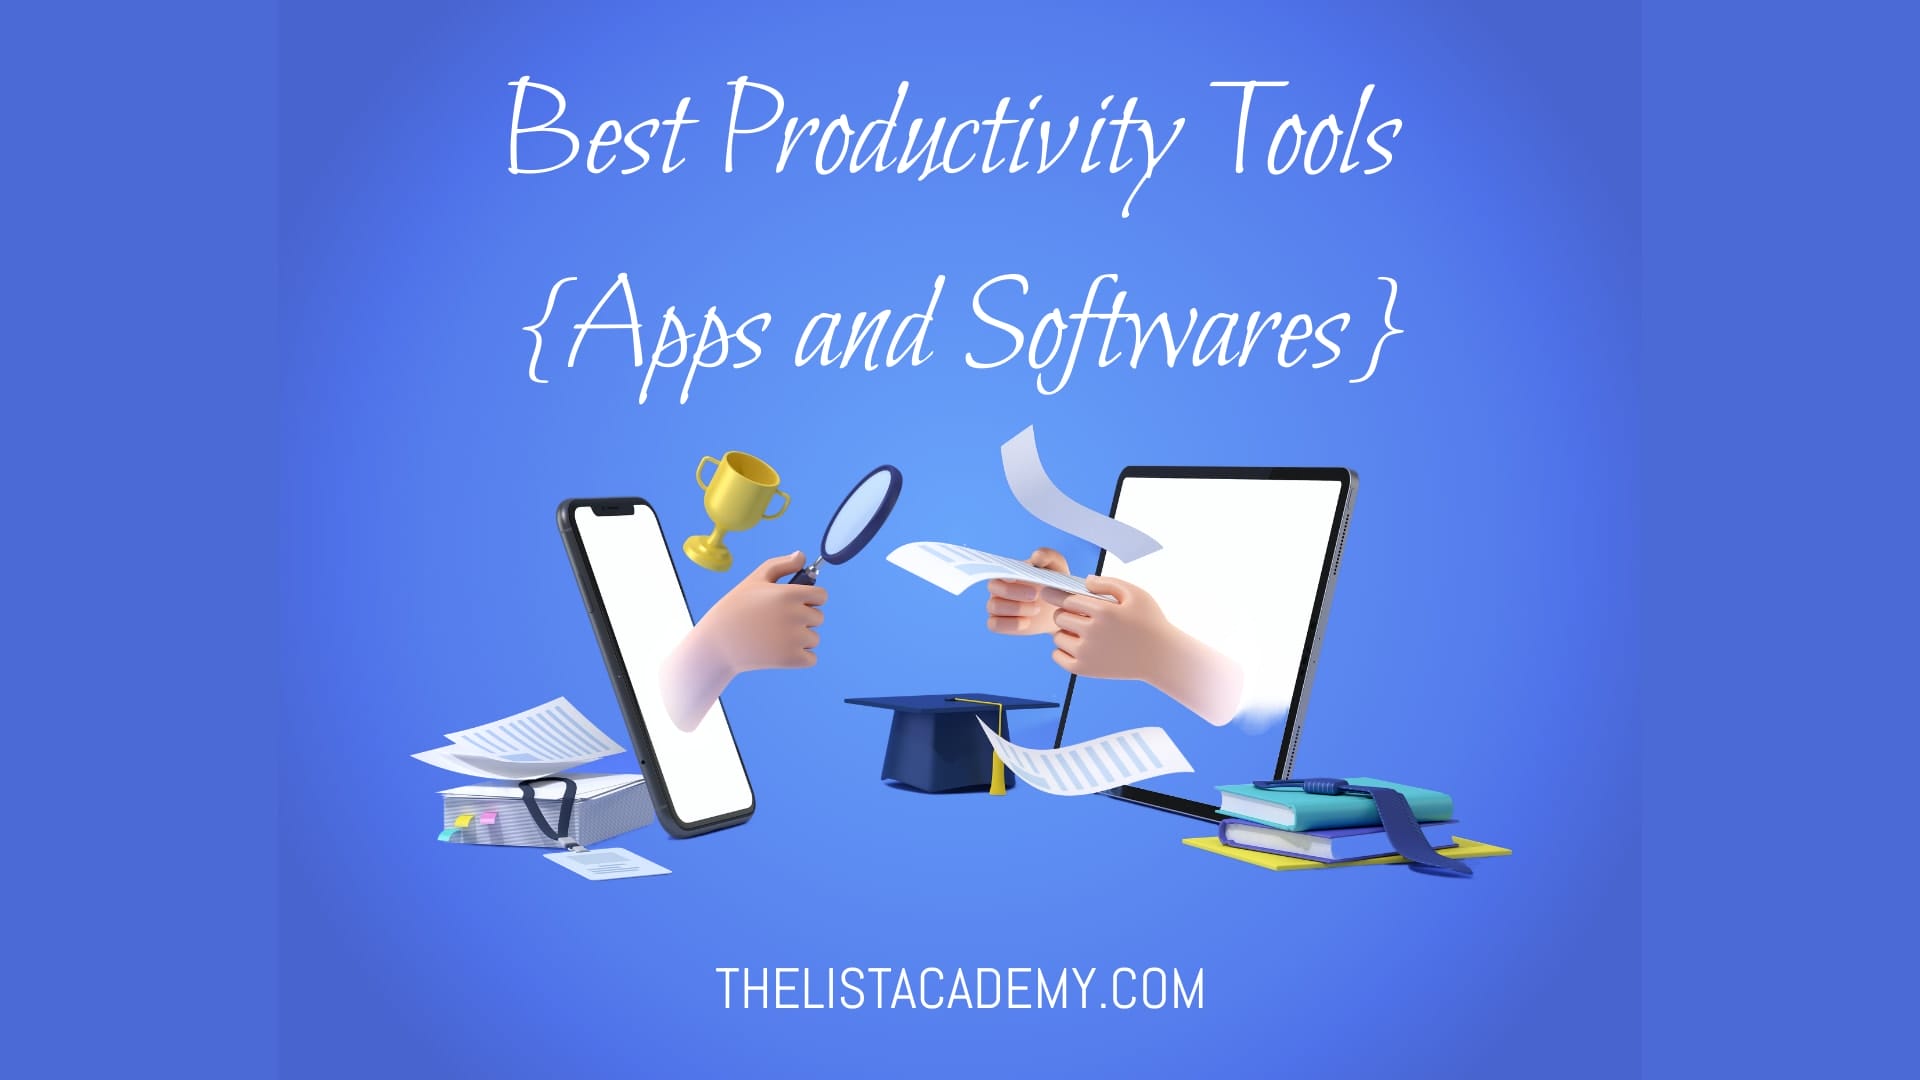 Cover Image For List : 24 Productivity Tools - List Of Best Productivity Apps And Softwares